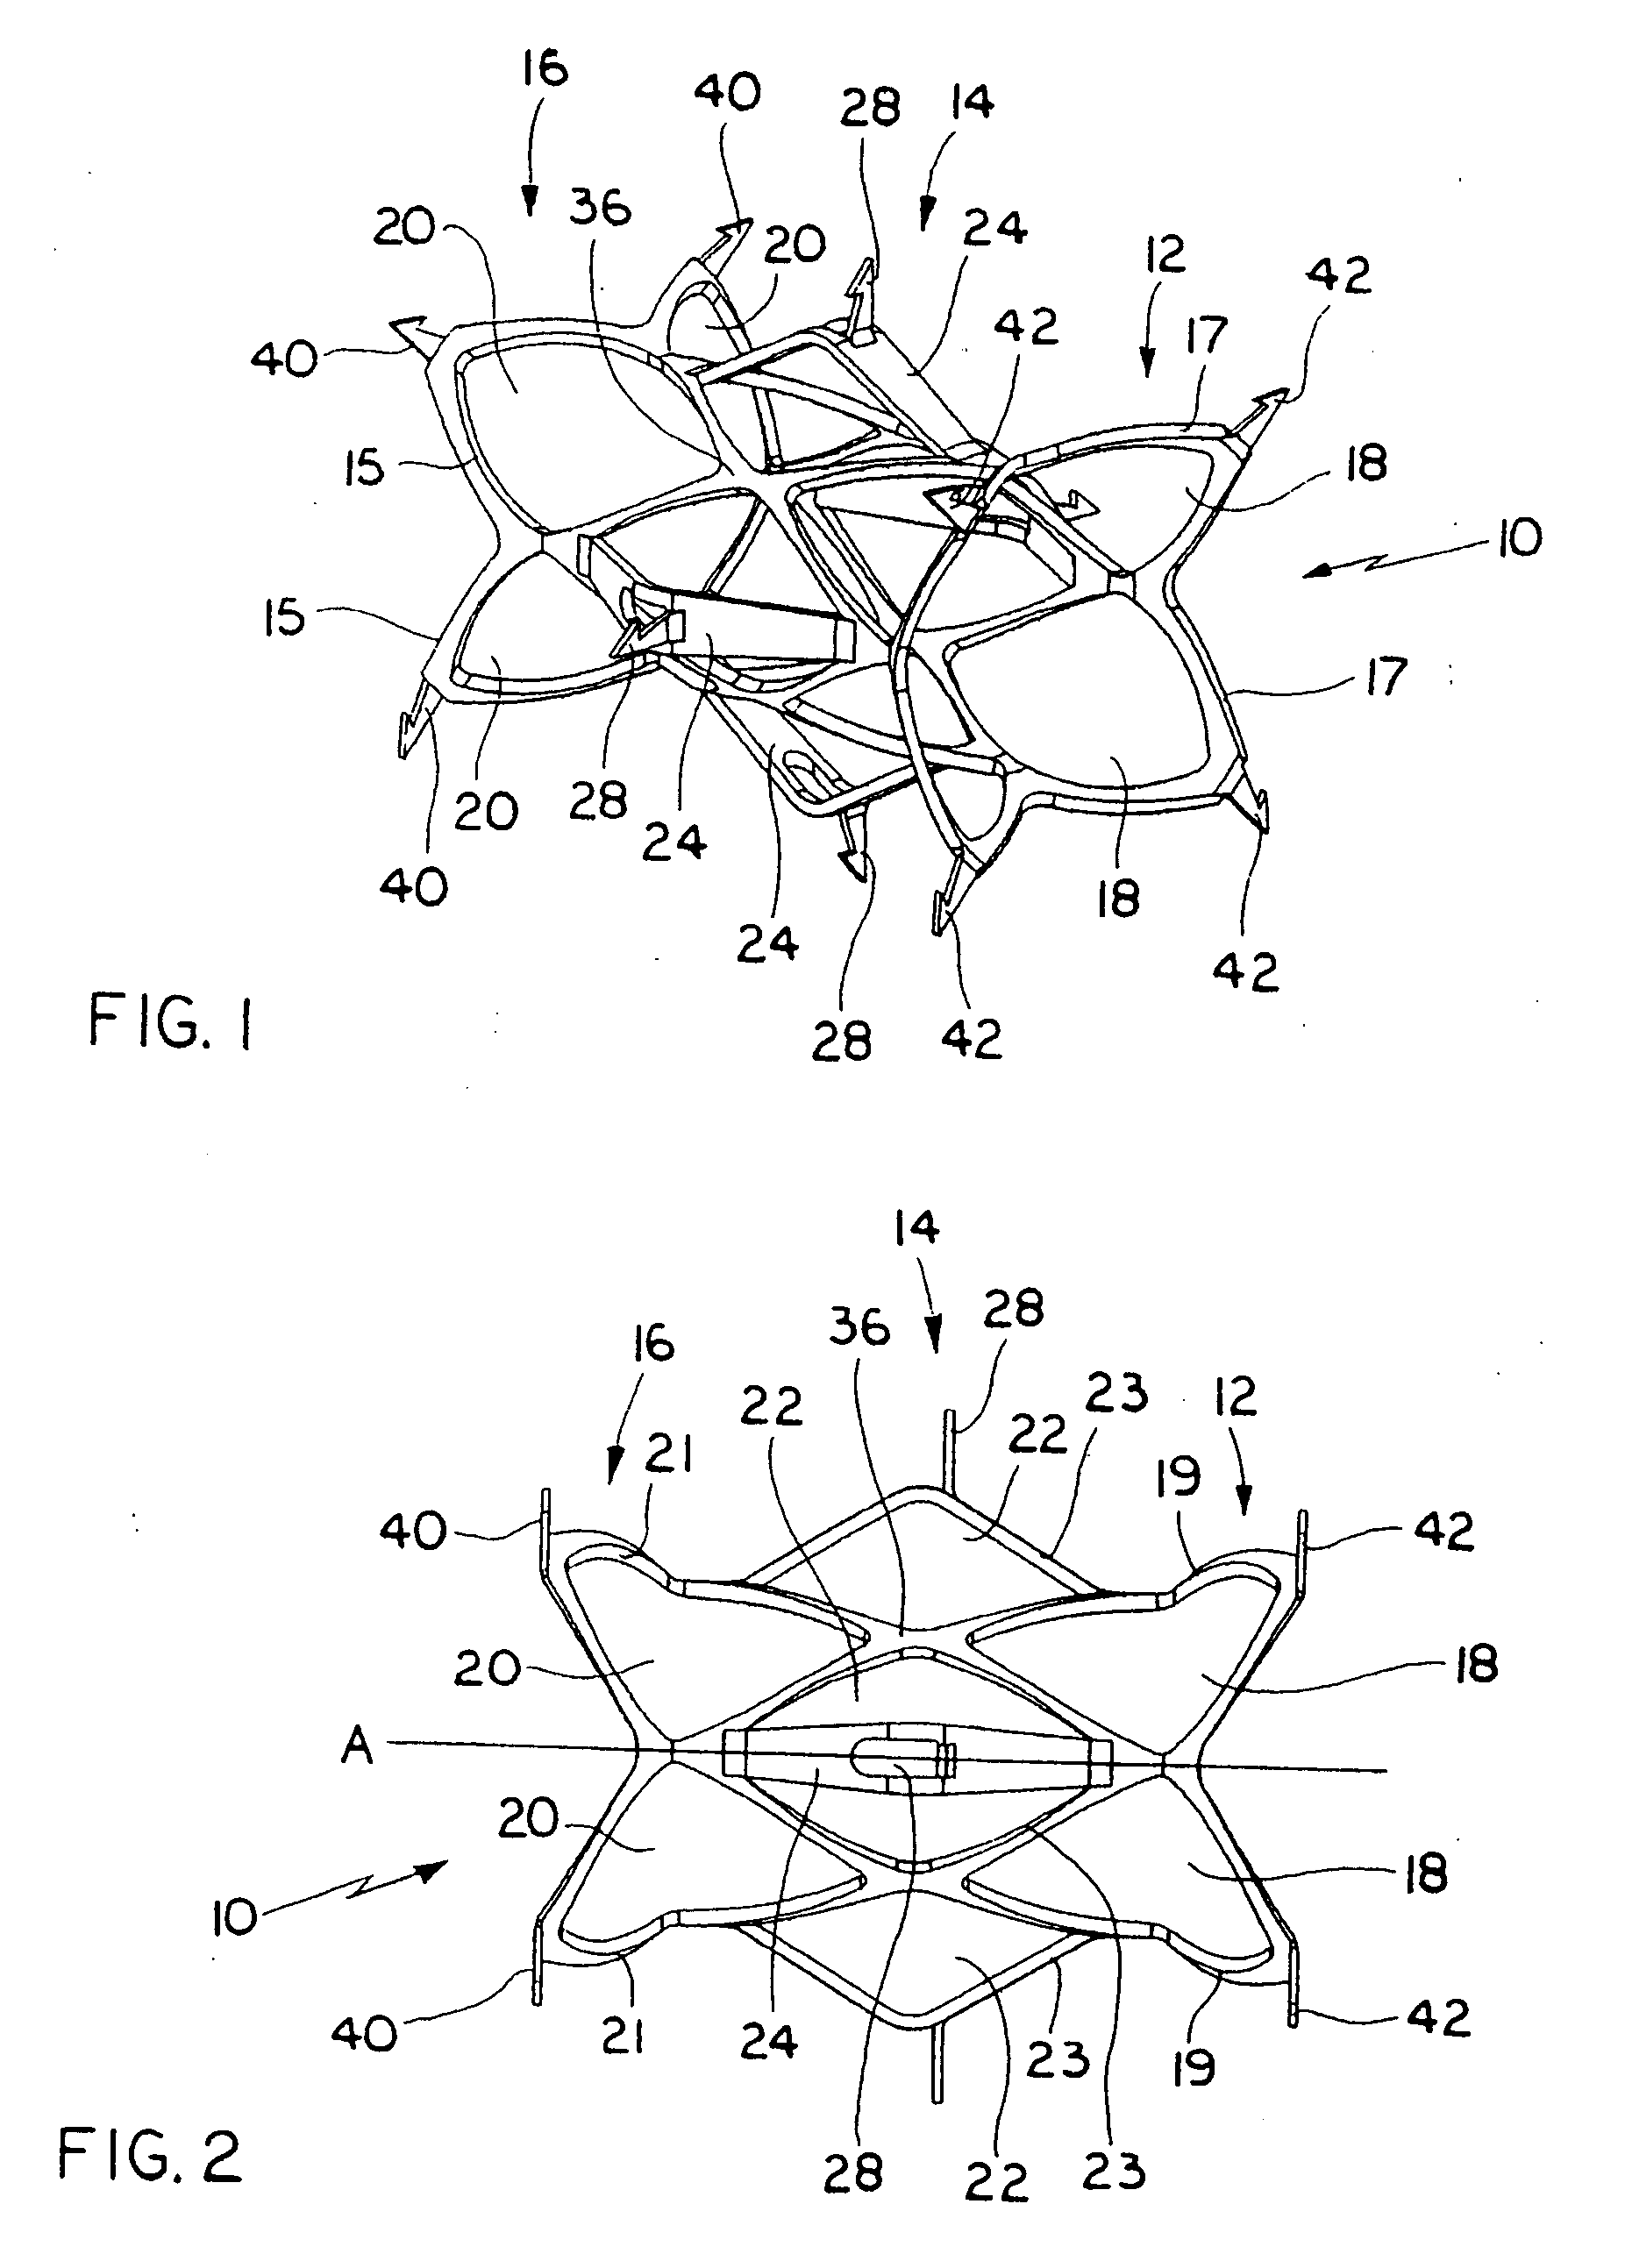 Vascular device with valve for approximating vessel wall